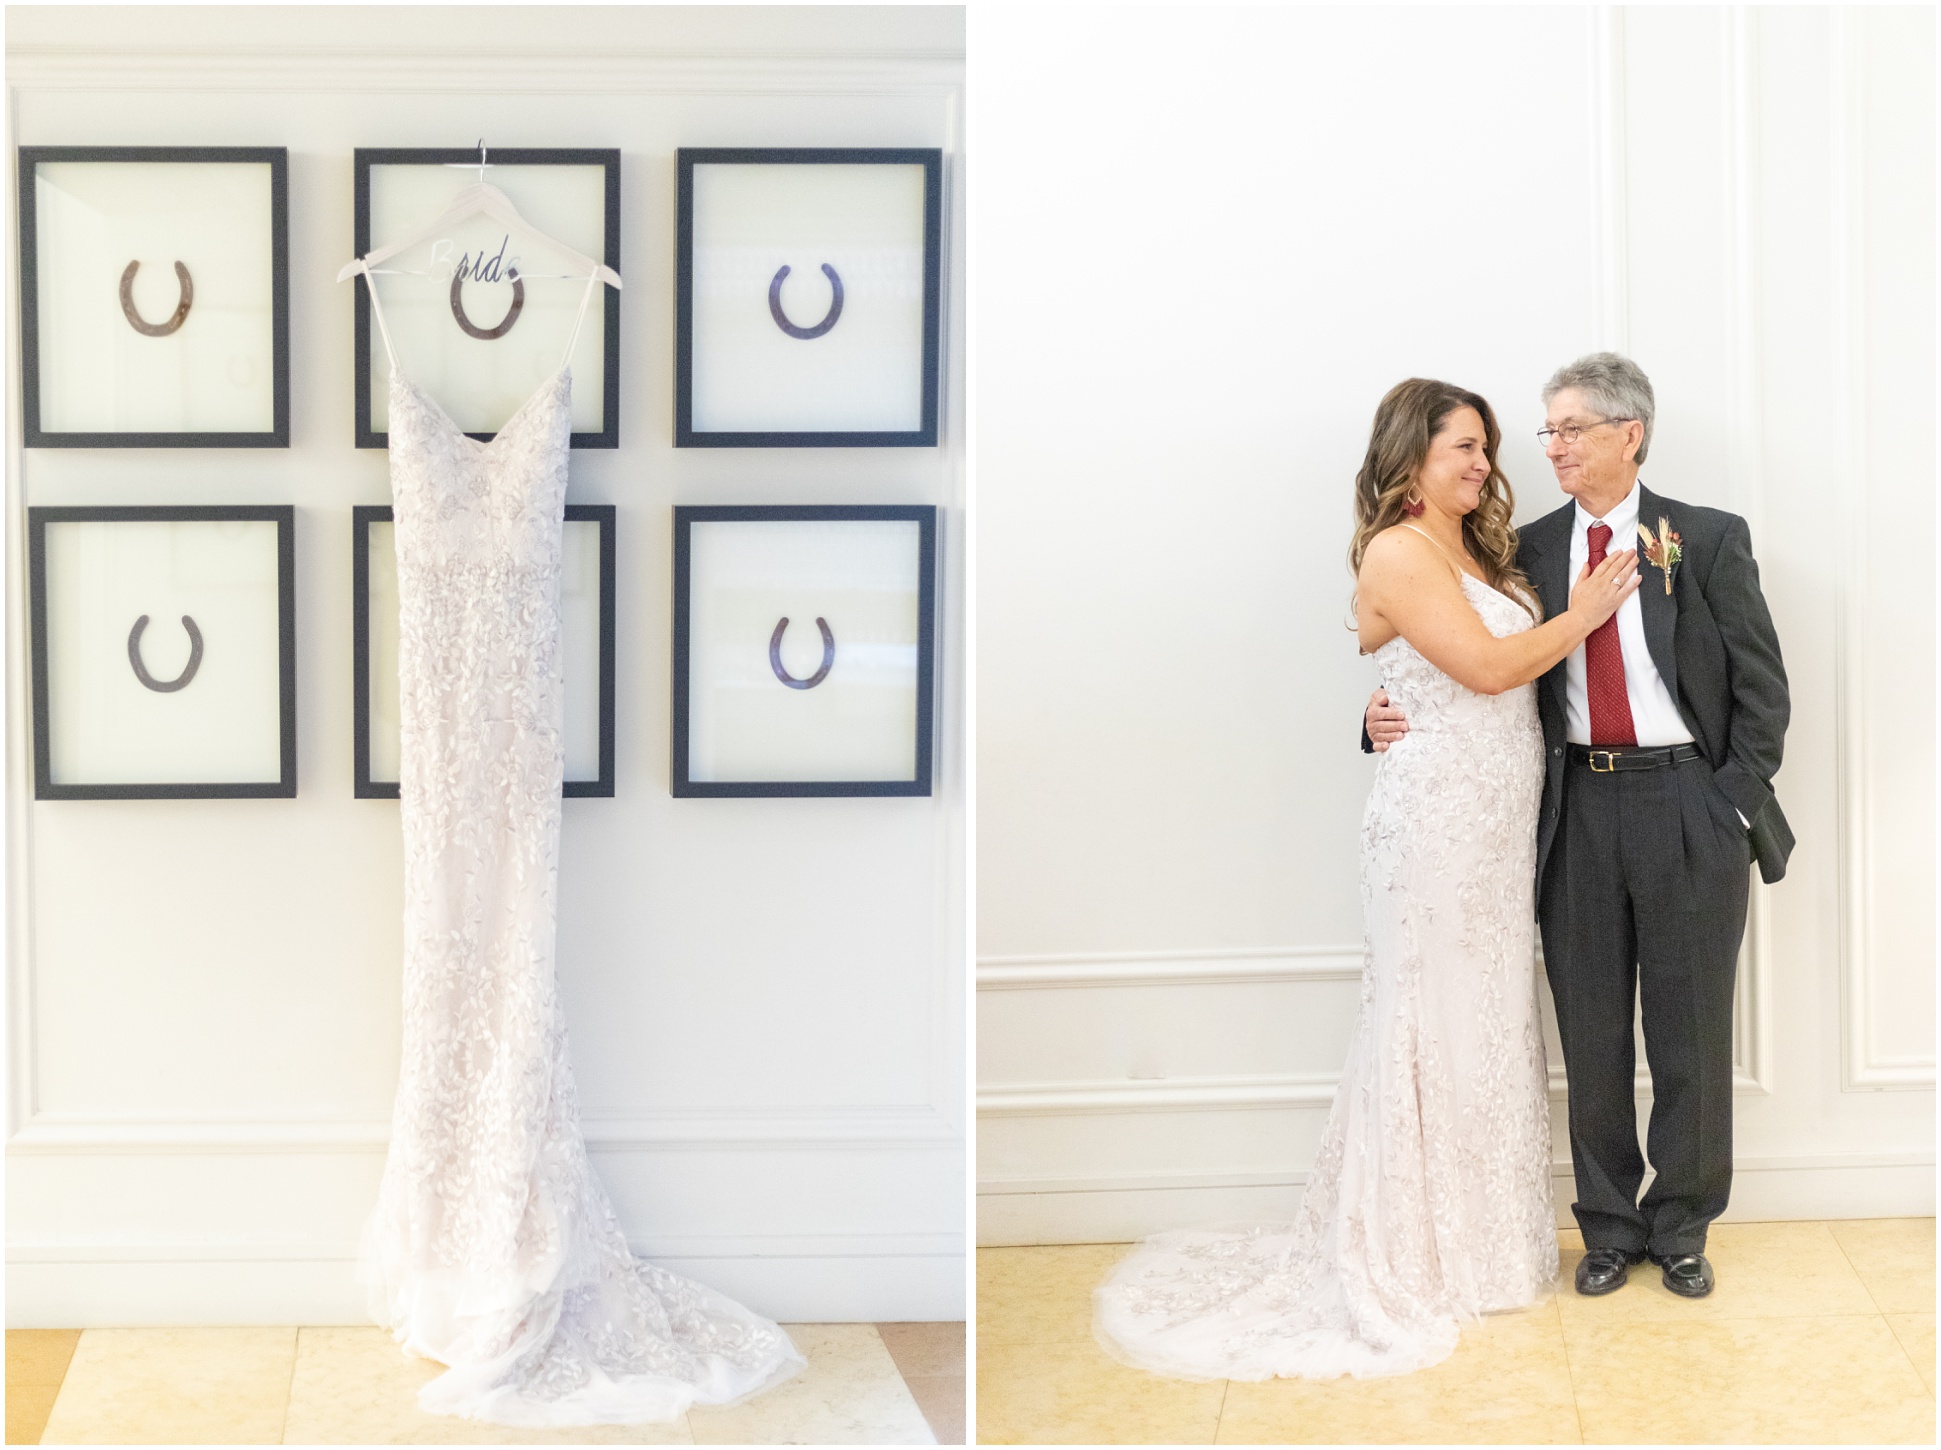 Left: Wedding Gown hanging at Delta Hotel, Right: Bride and Father portrait at Delta Hotel